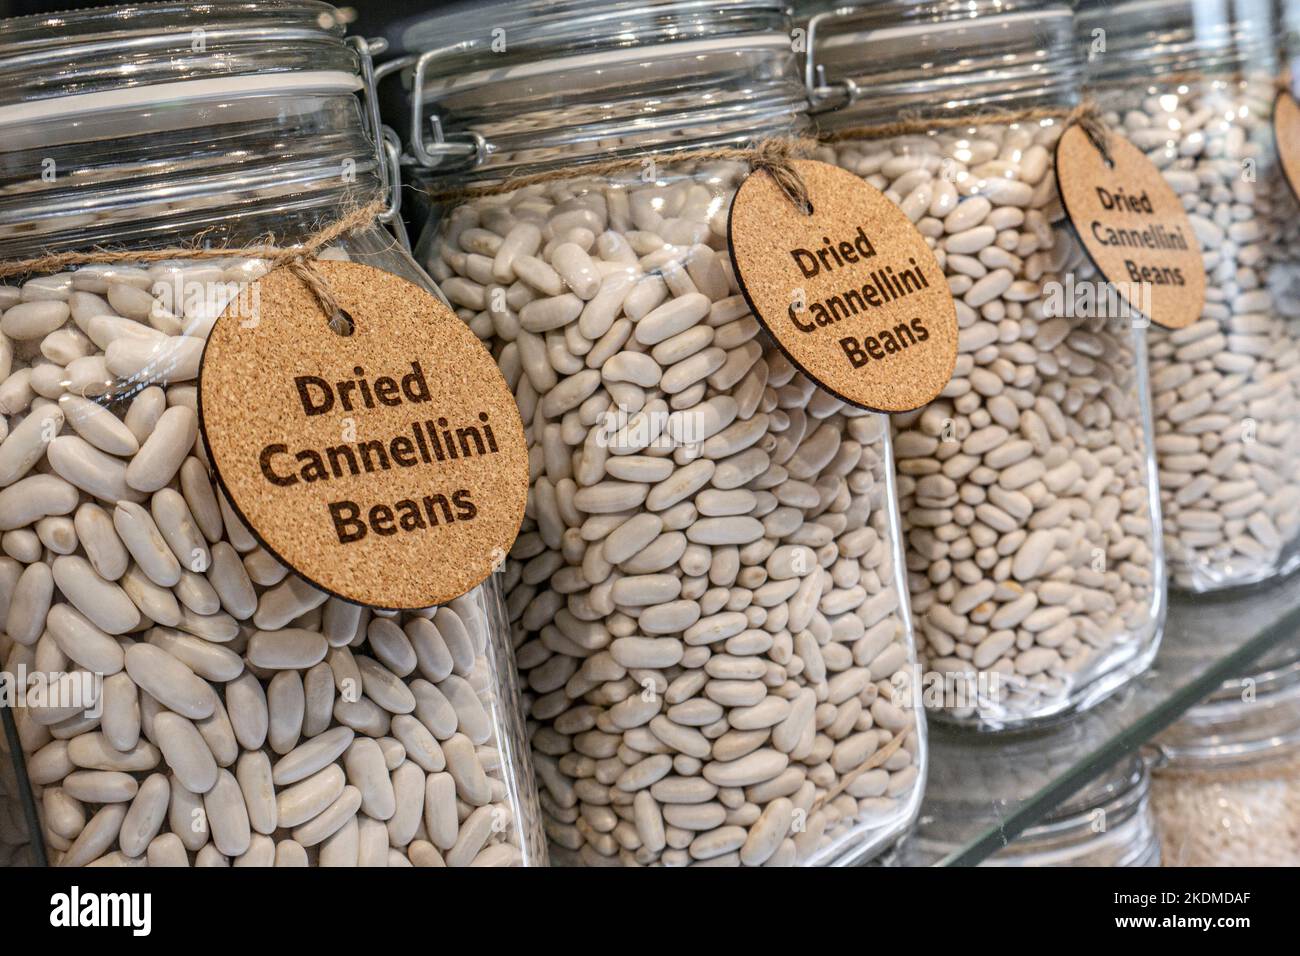 CANNELLINI BEANS DISPLAY type of white kidney bean in glass jars popular in Italy used in minestrone and other Mediterranean dishes. Stock Photo